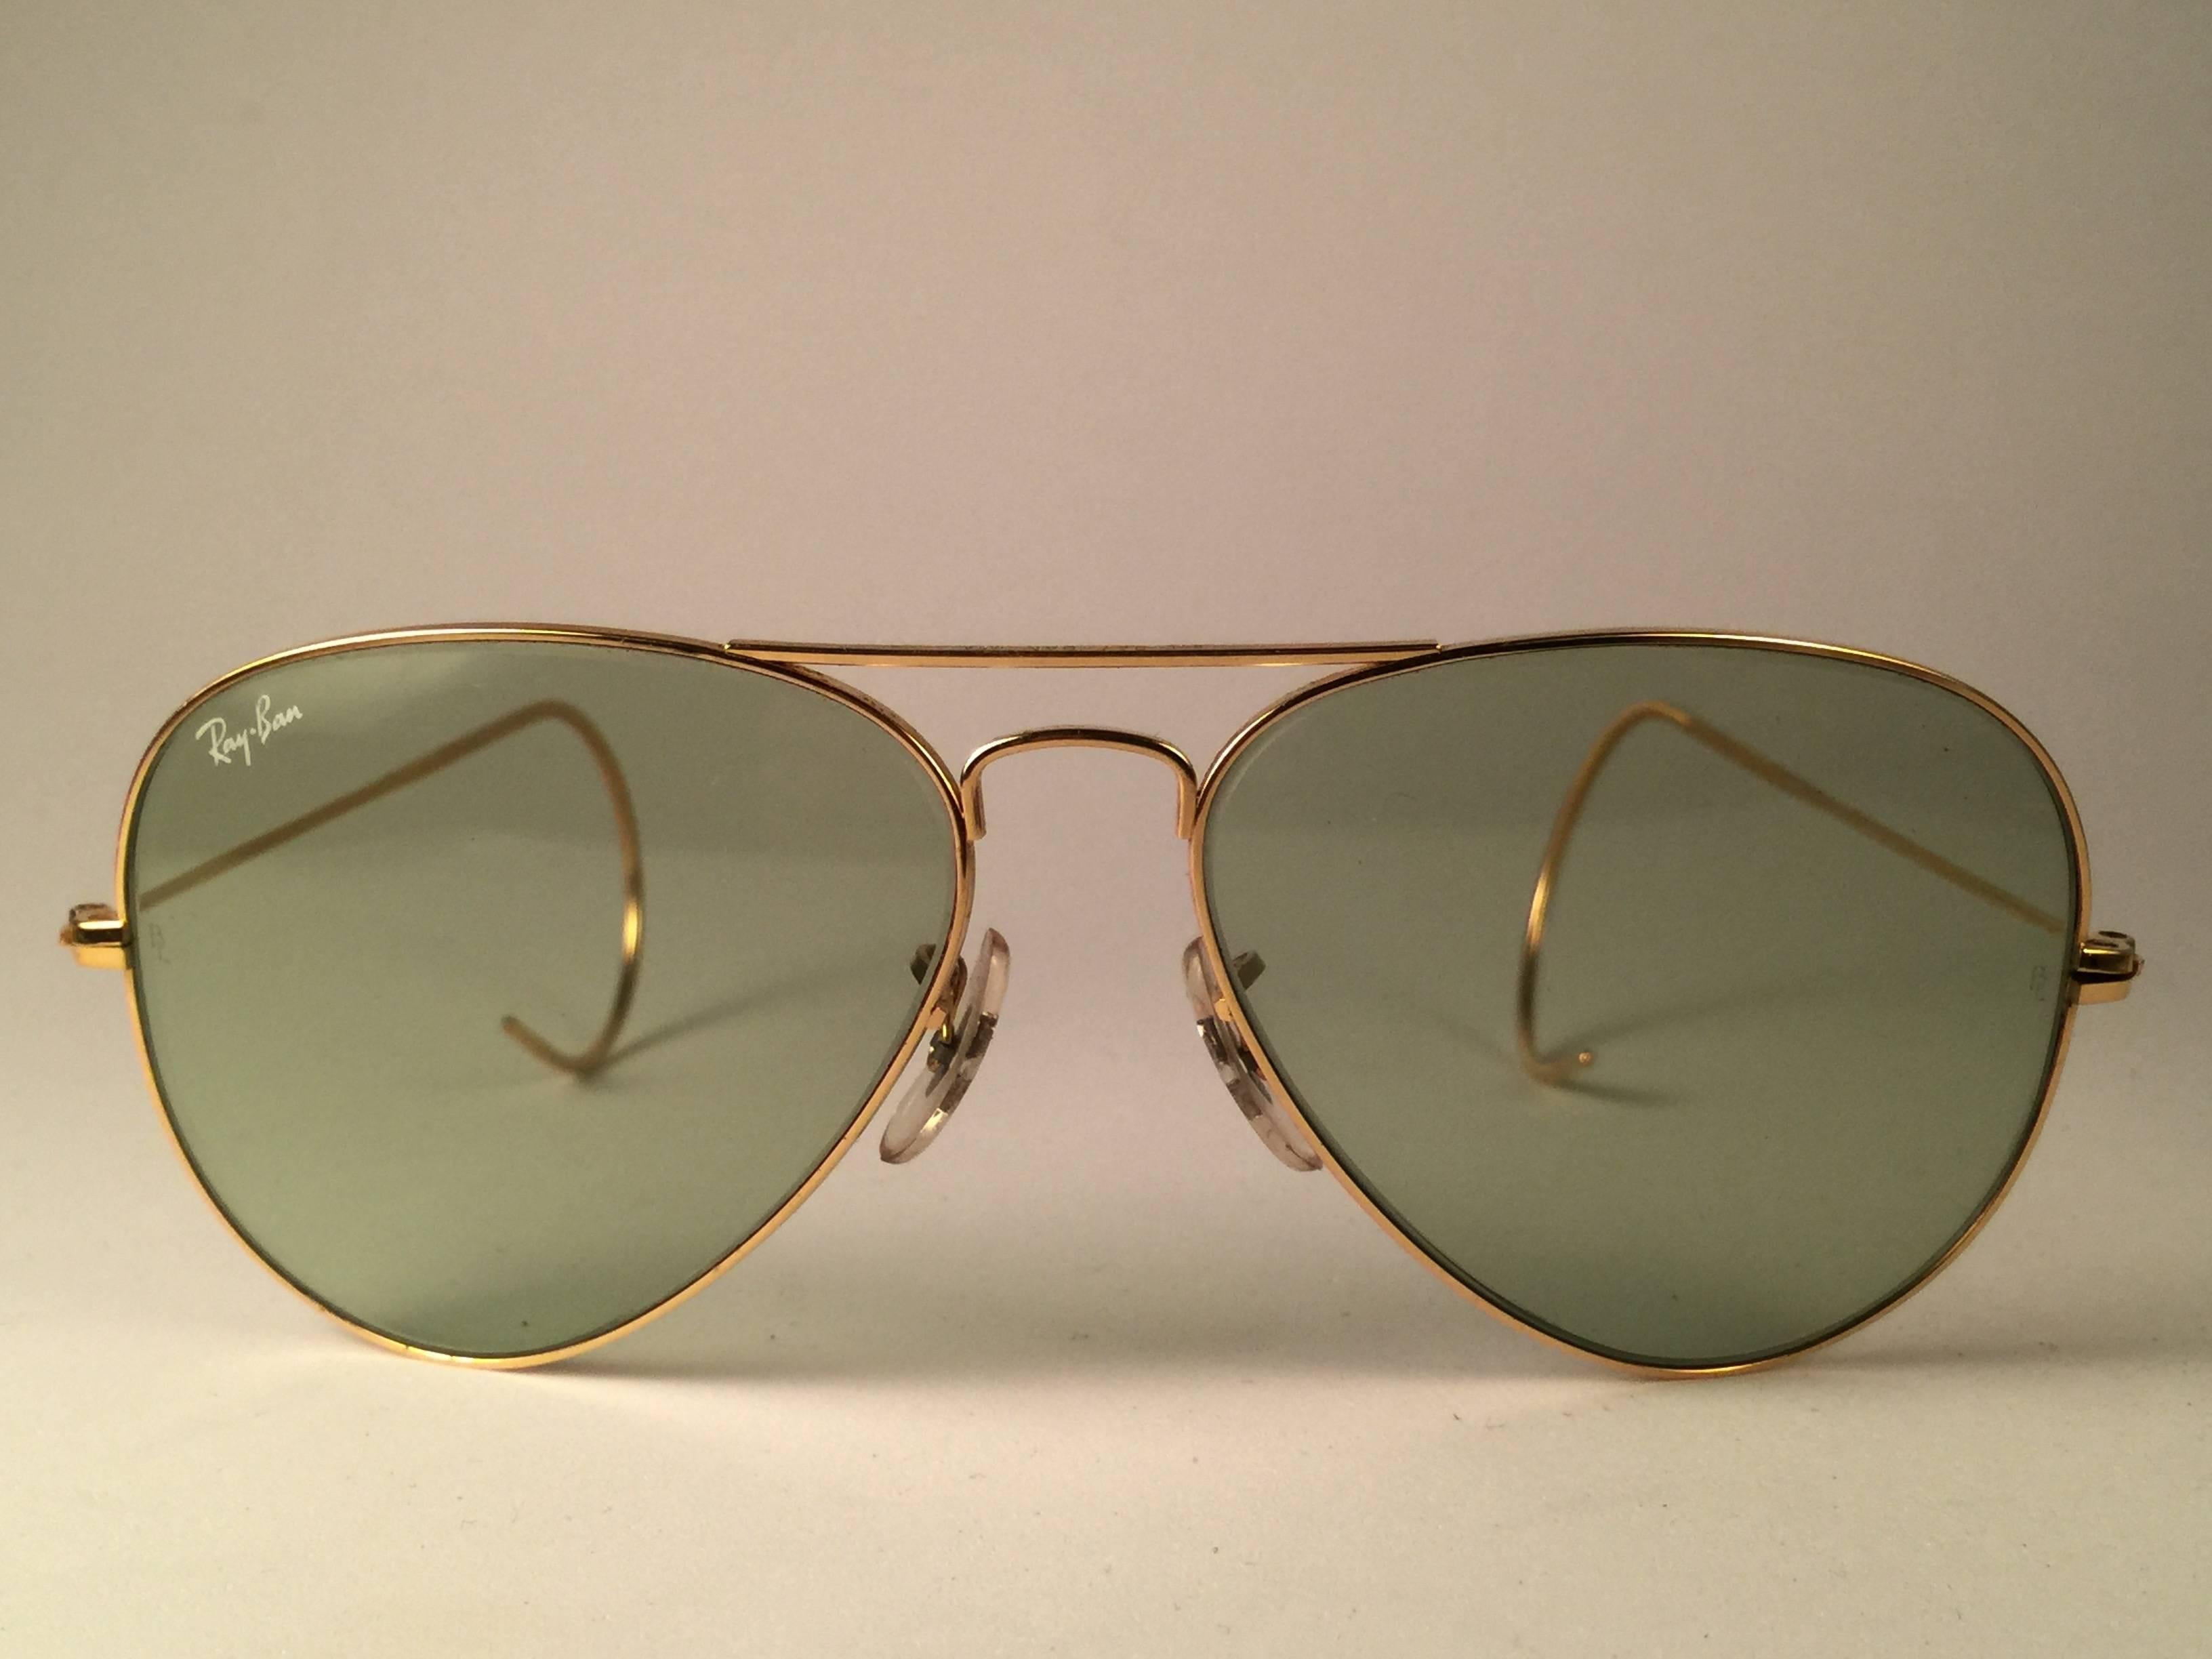 New vintage Ray Ban Aviator Gold frame with B&L green changeable lenses.

Comes with its original Ray Ban B&L case.  

Rare and hard to find in this new, never worn or displayed condition.